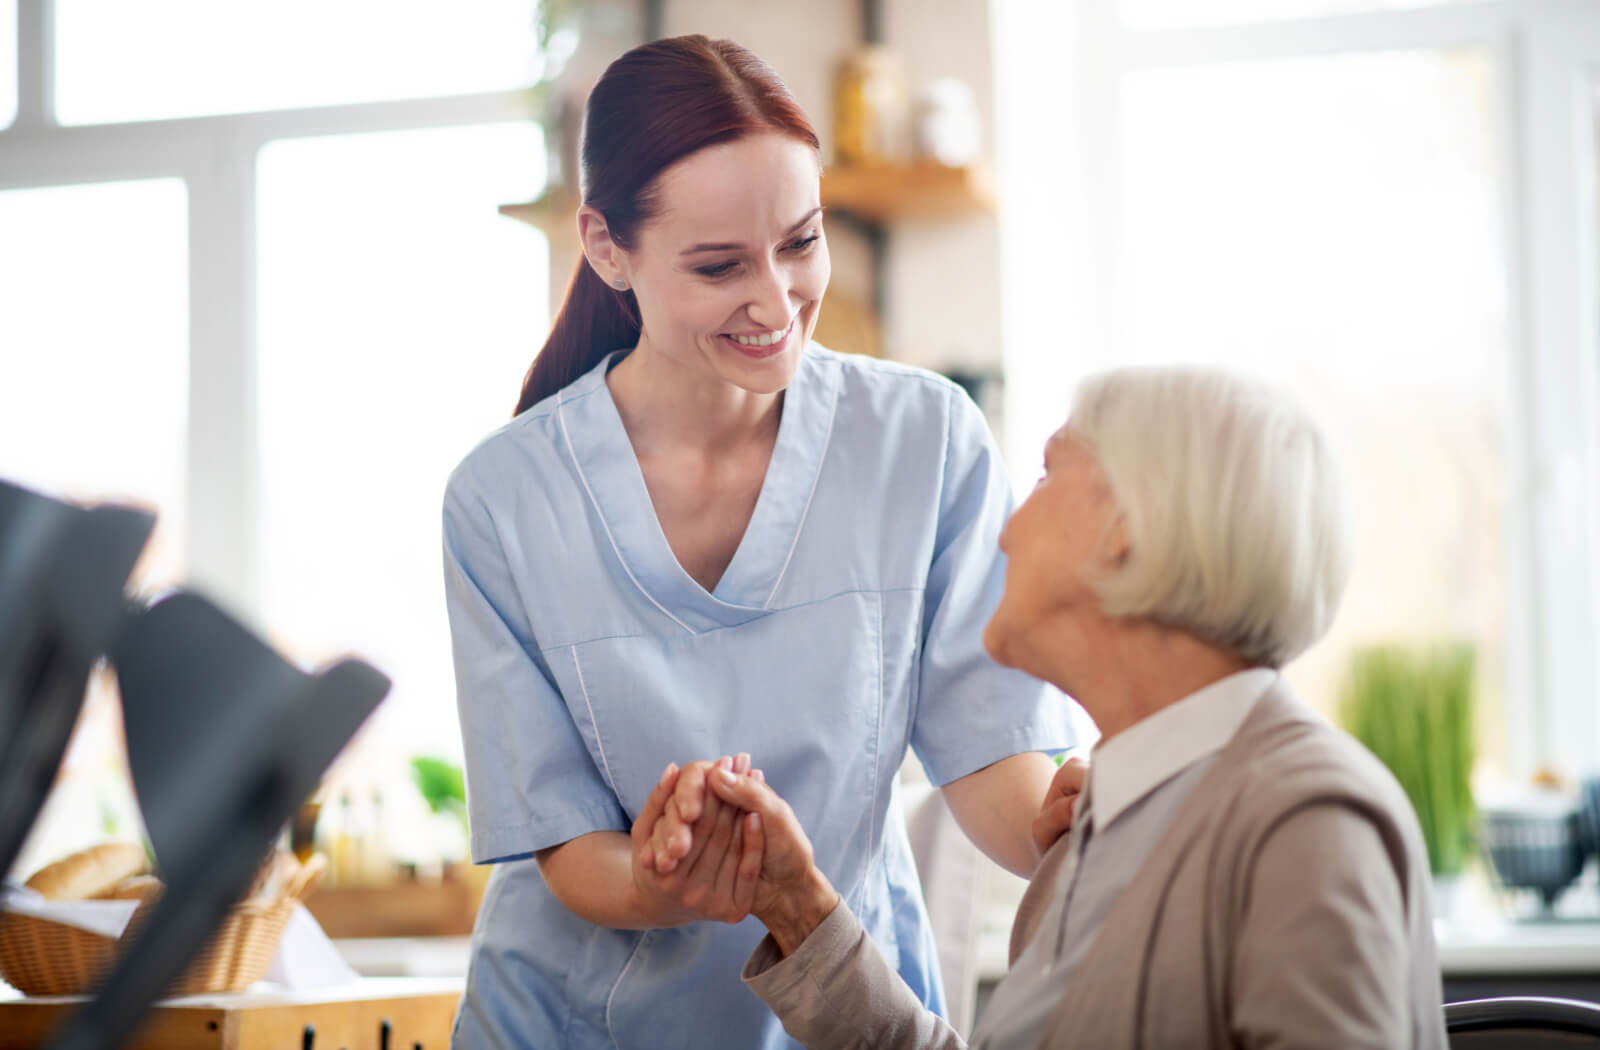 A female caregiver holding a senior woman's hand while looking at her and smiling.